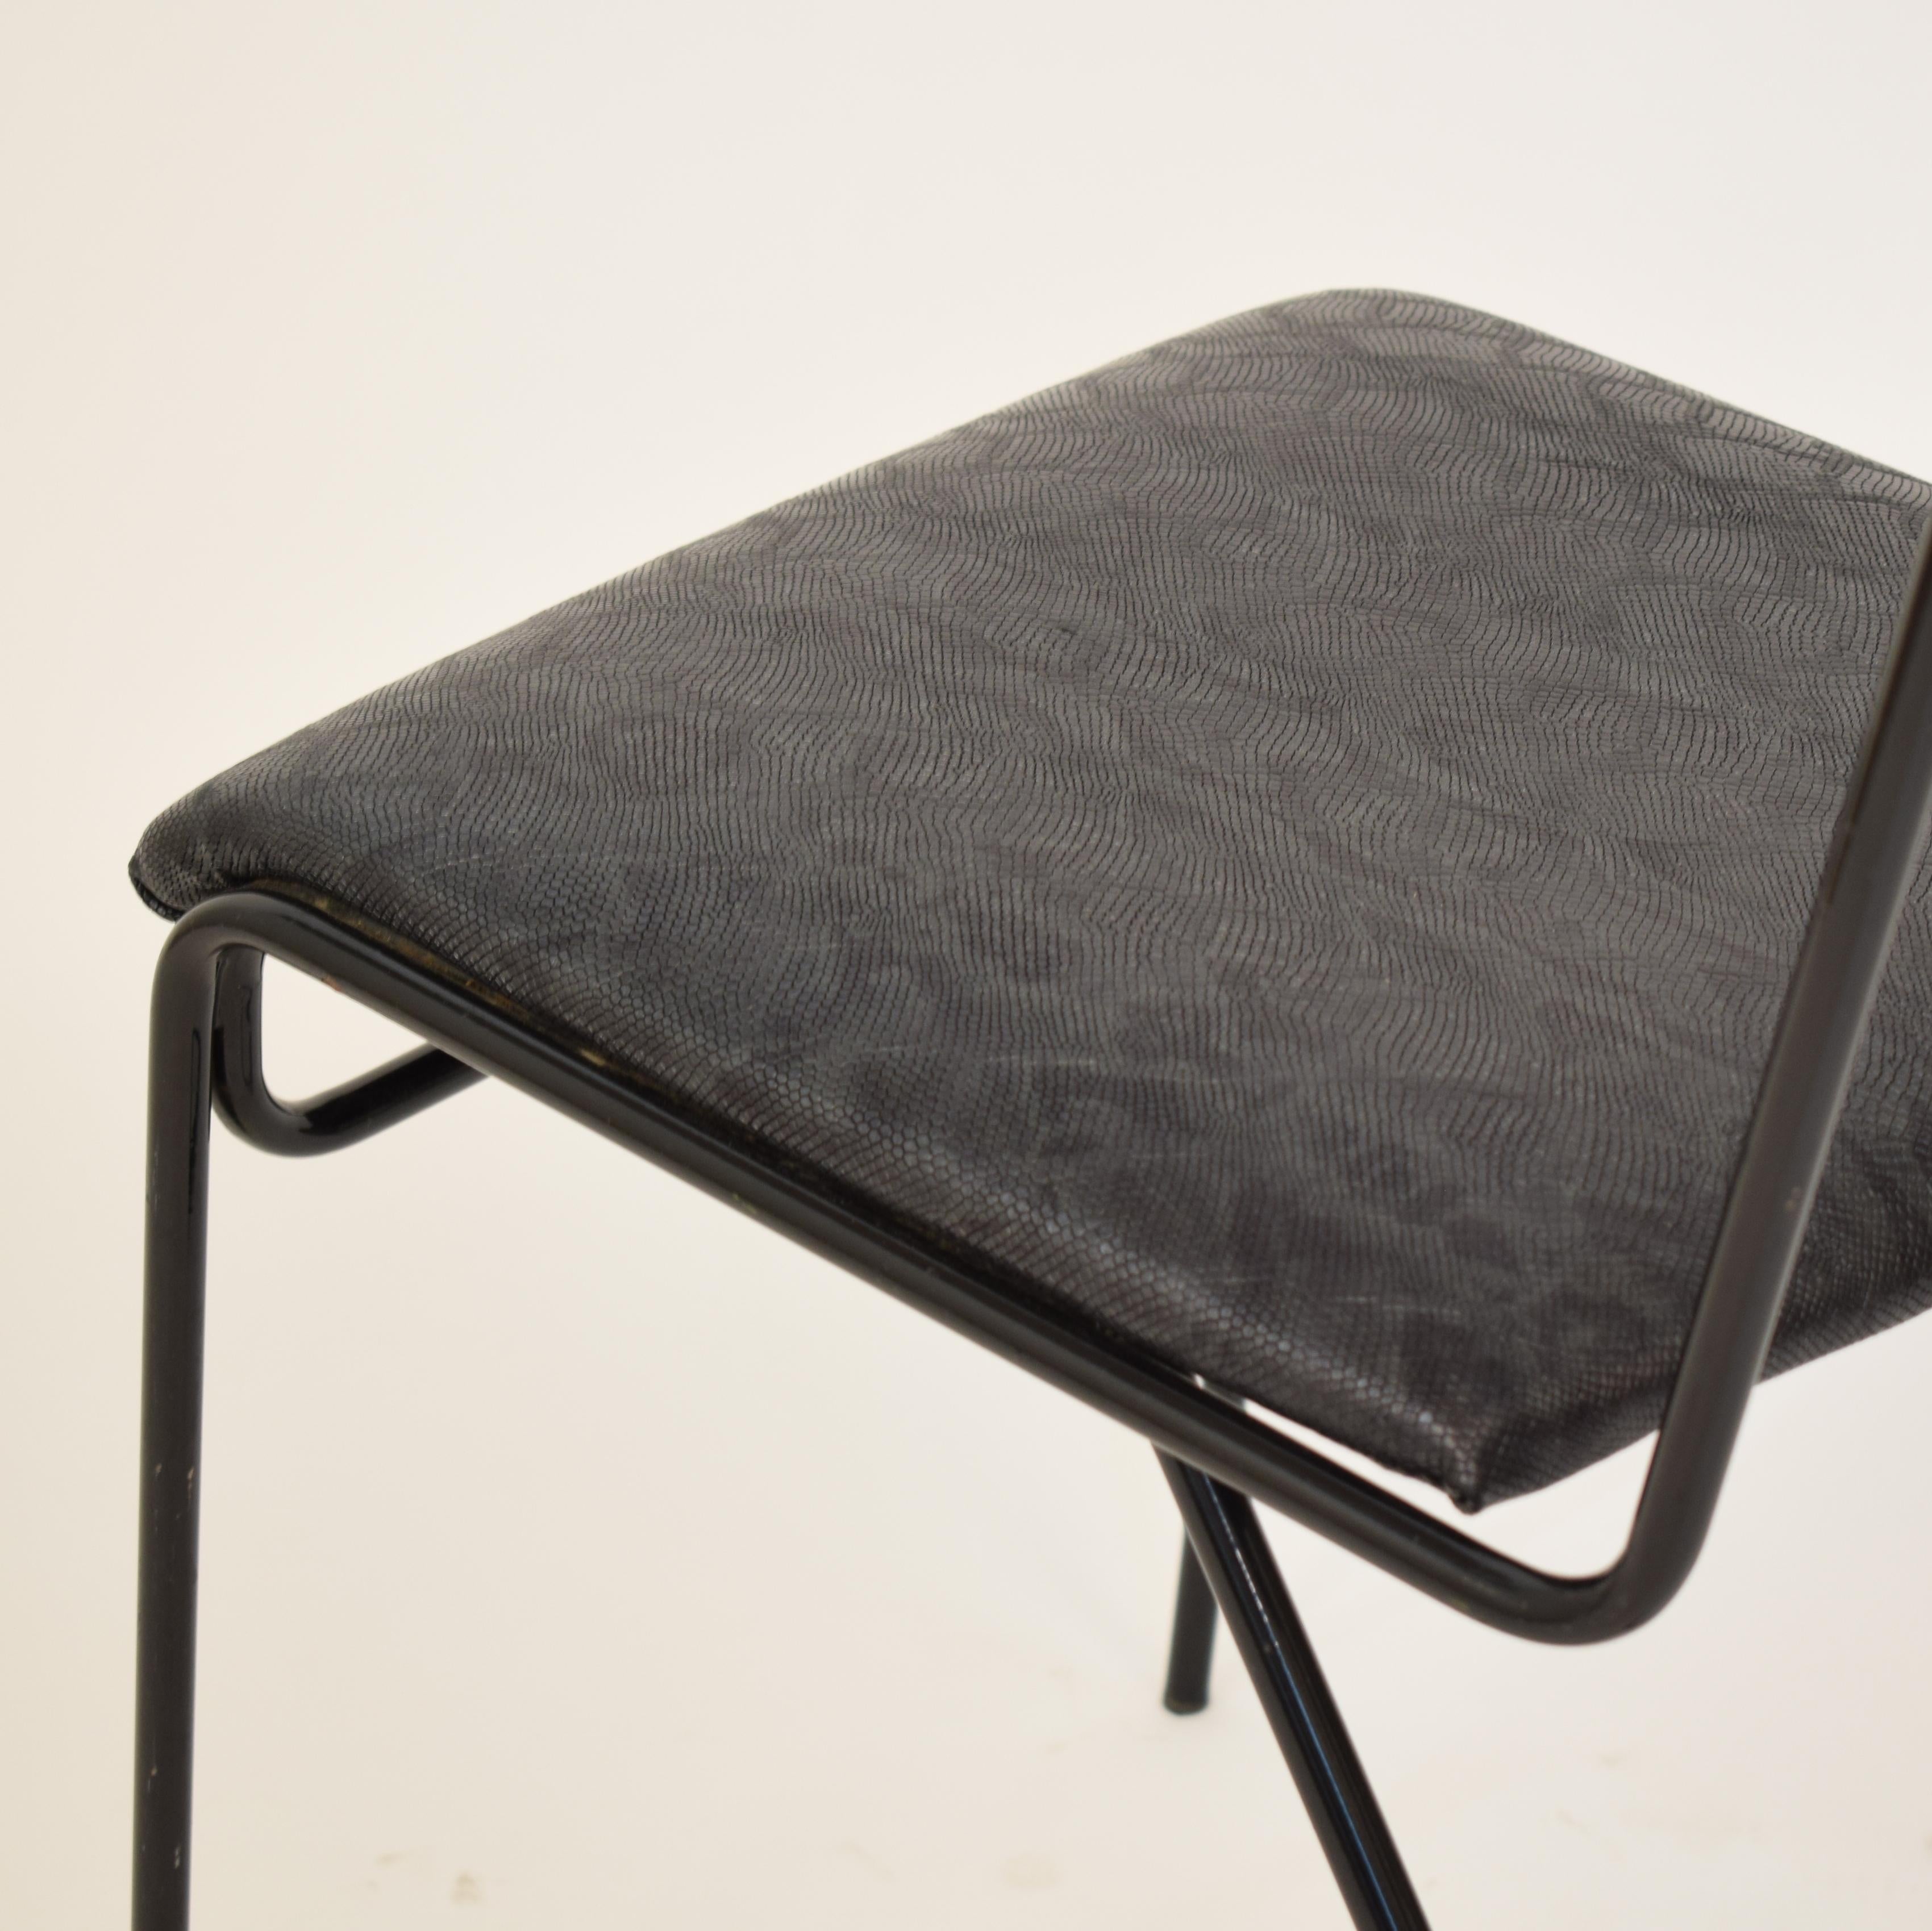 1980 Italian Midcentury / Memphis Black Lacquered Metal Chair with Leather Seat 3